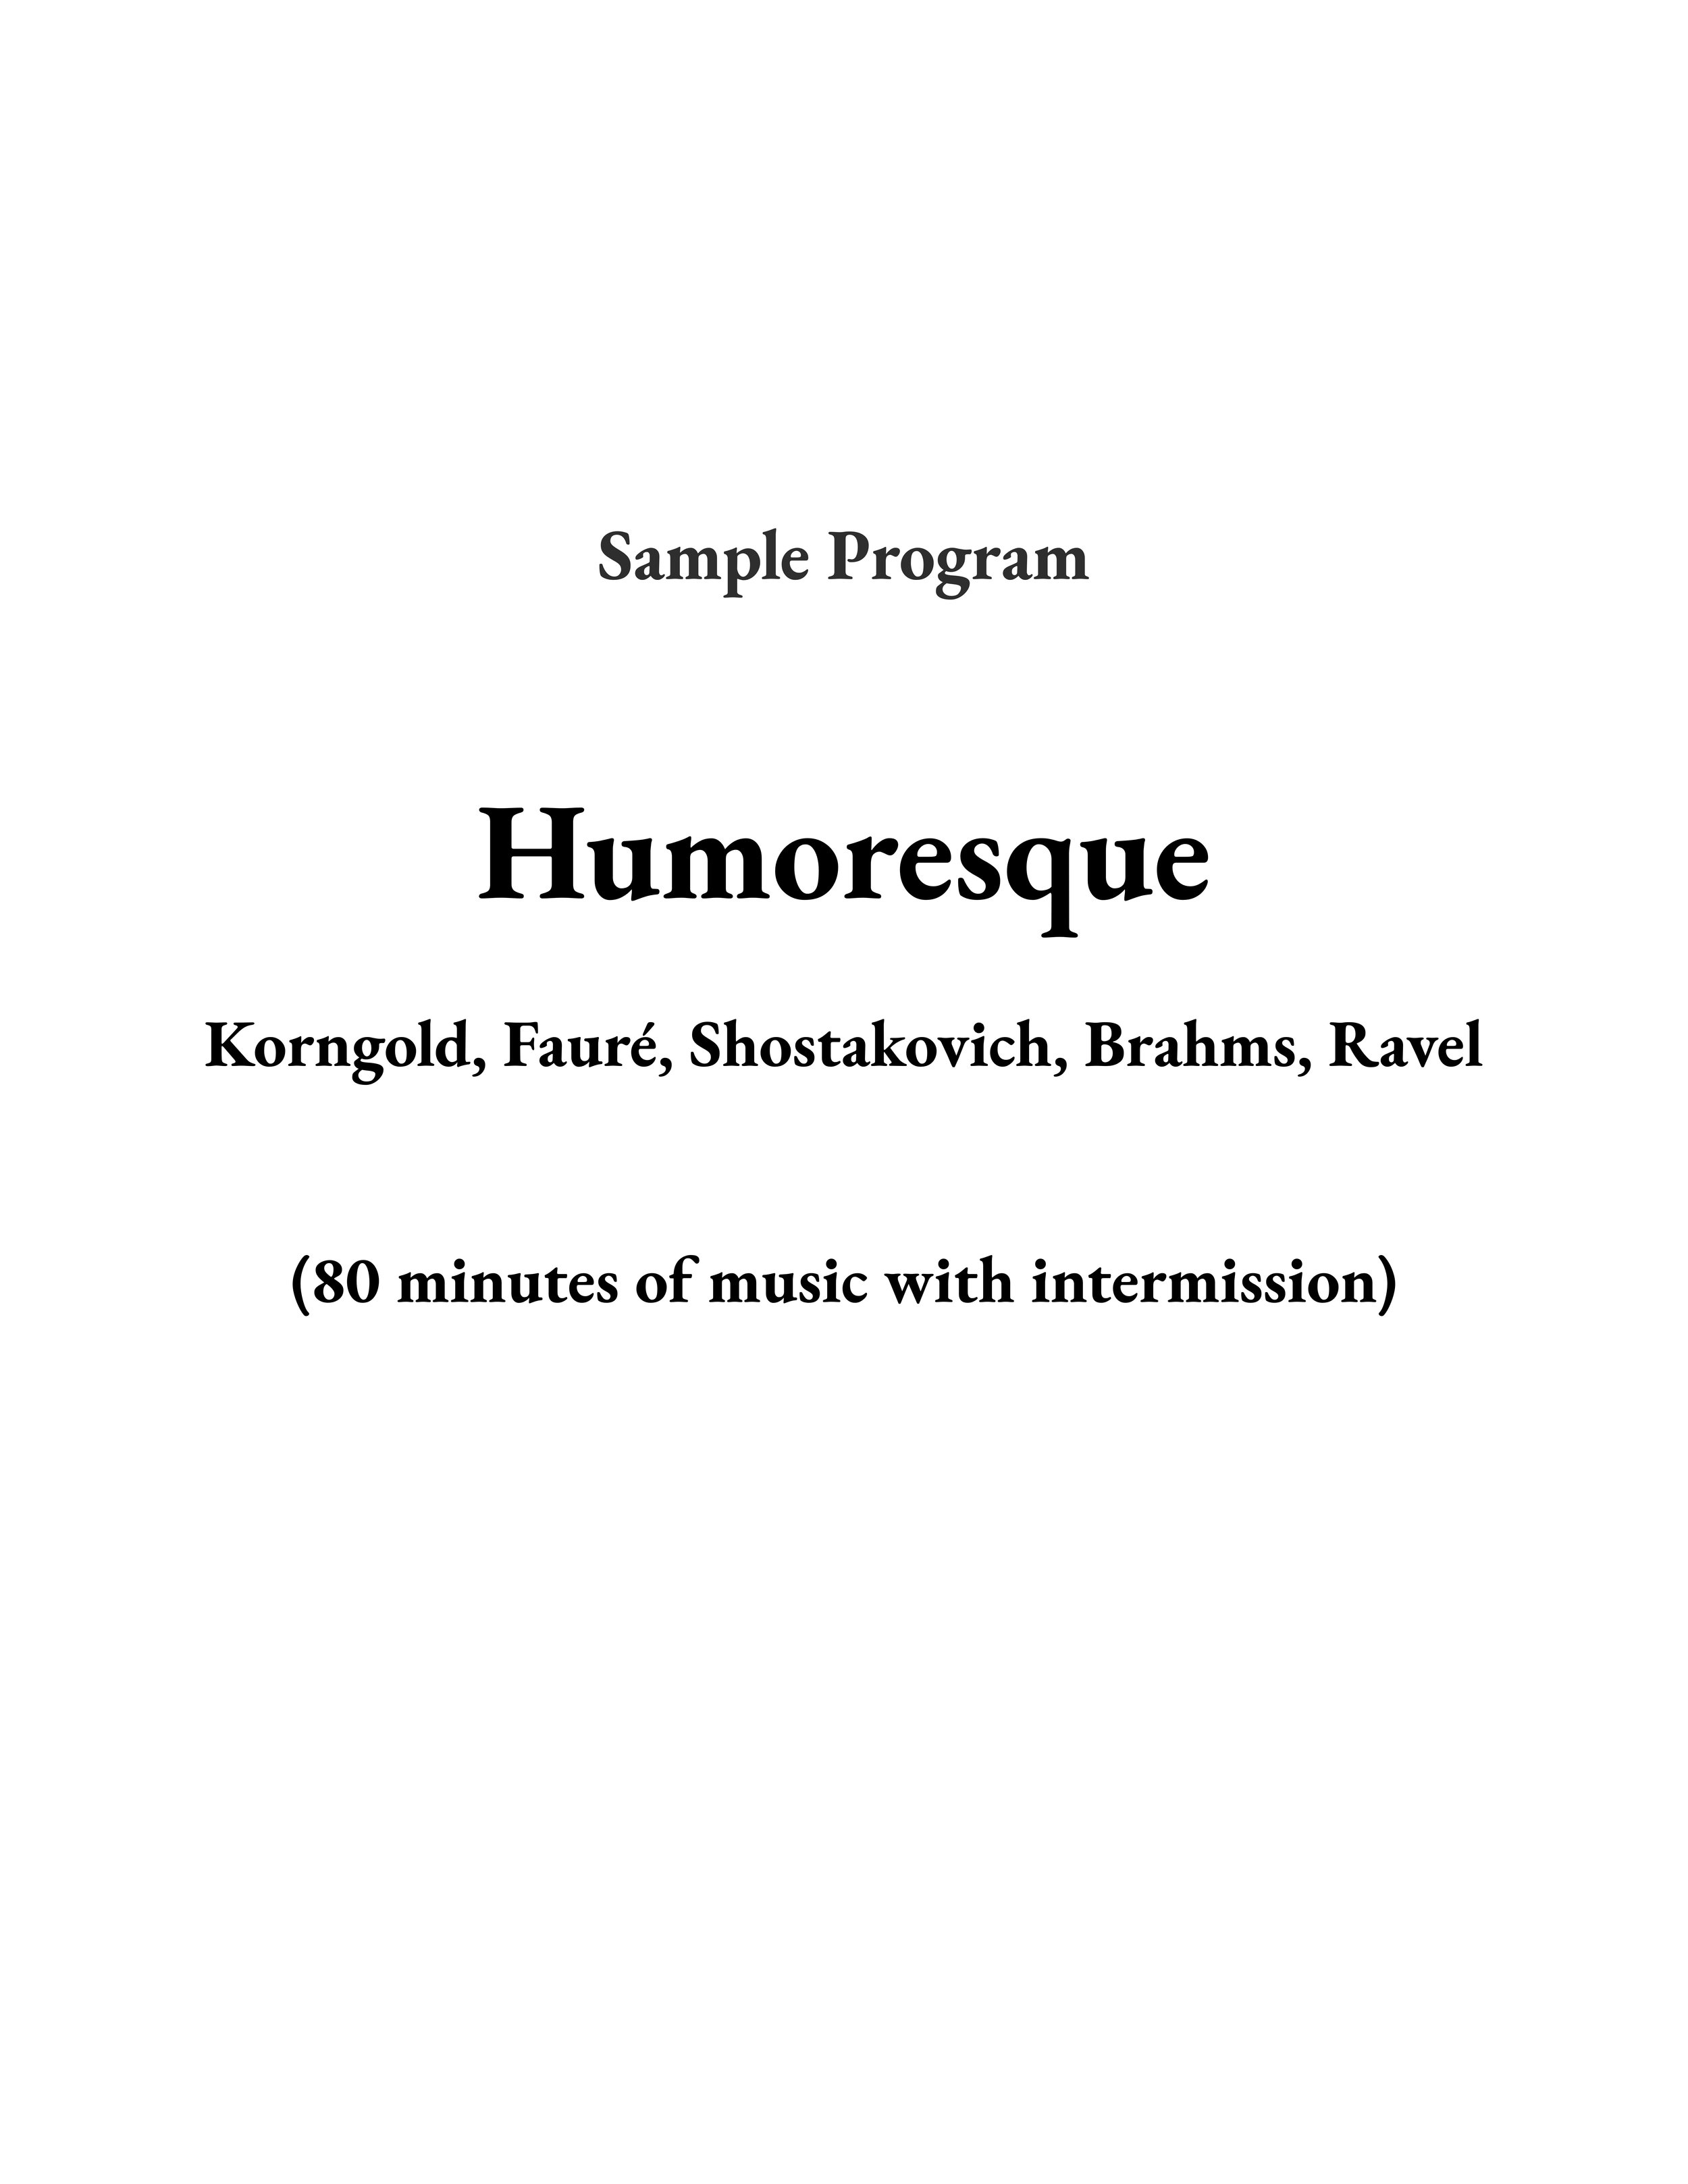 Humoresque front page (1).jpg